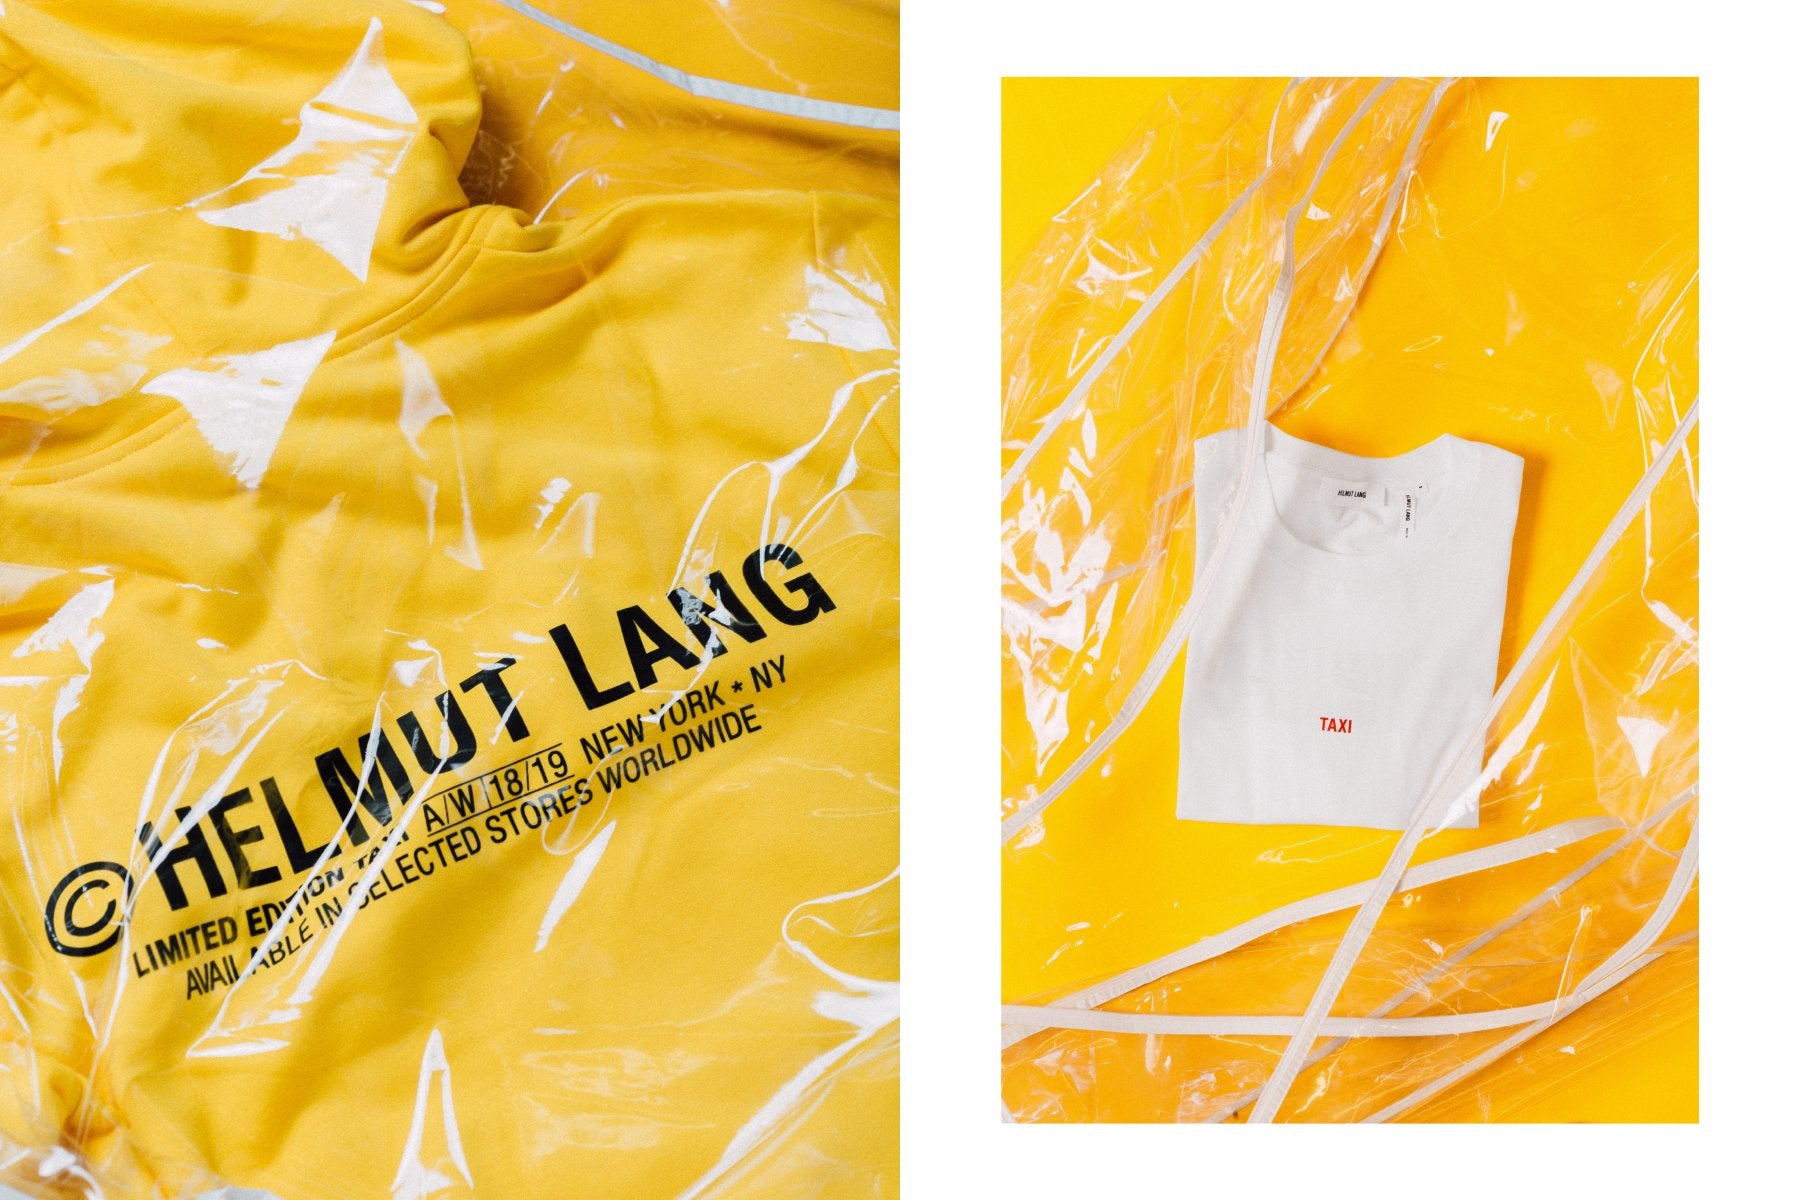 Helmut Lang Launches NYC Taxi Collection